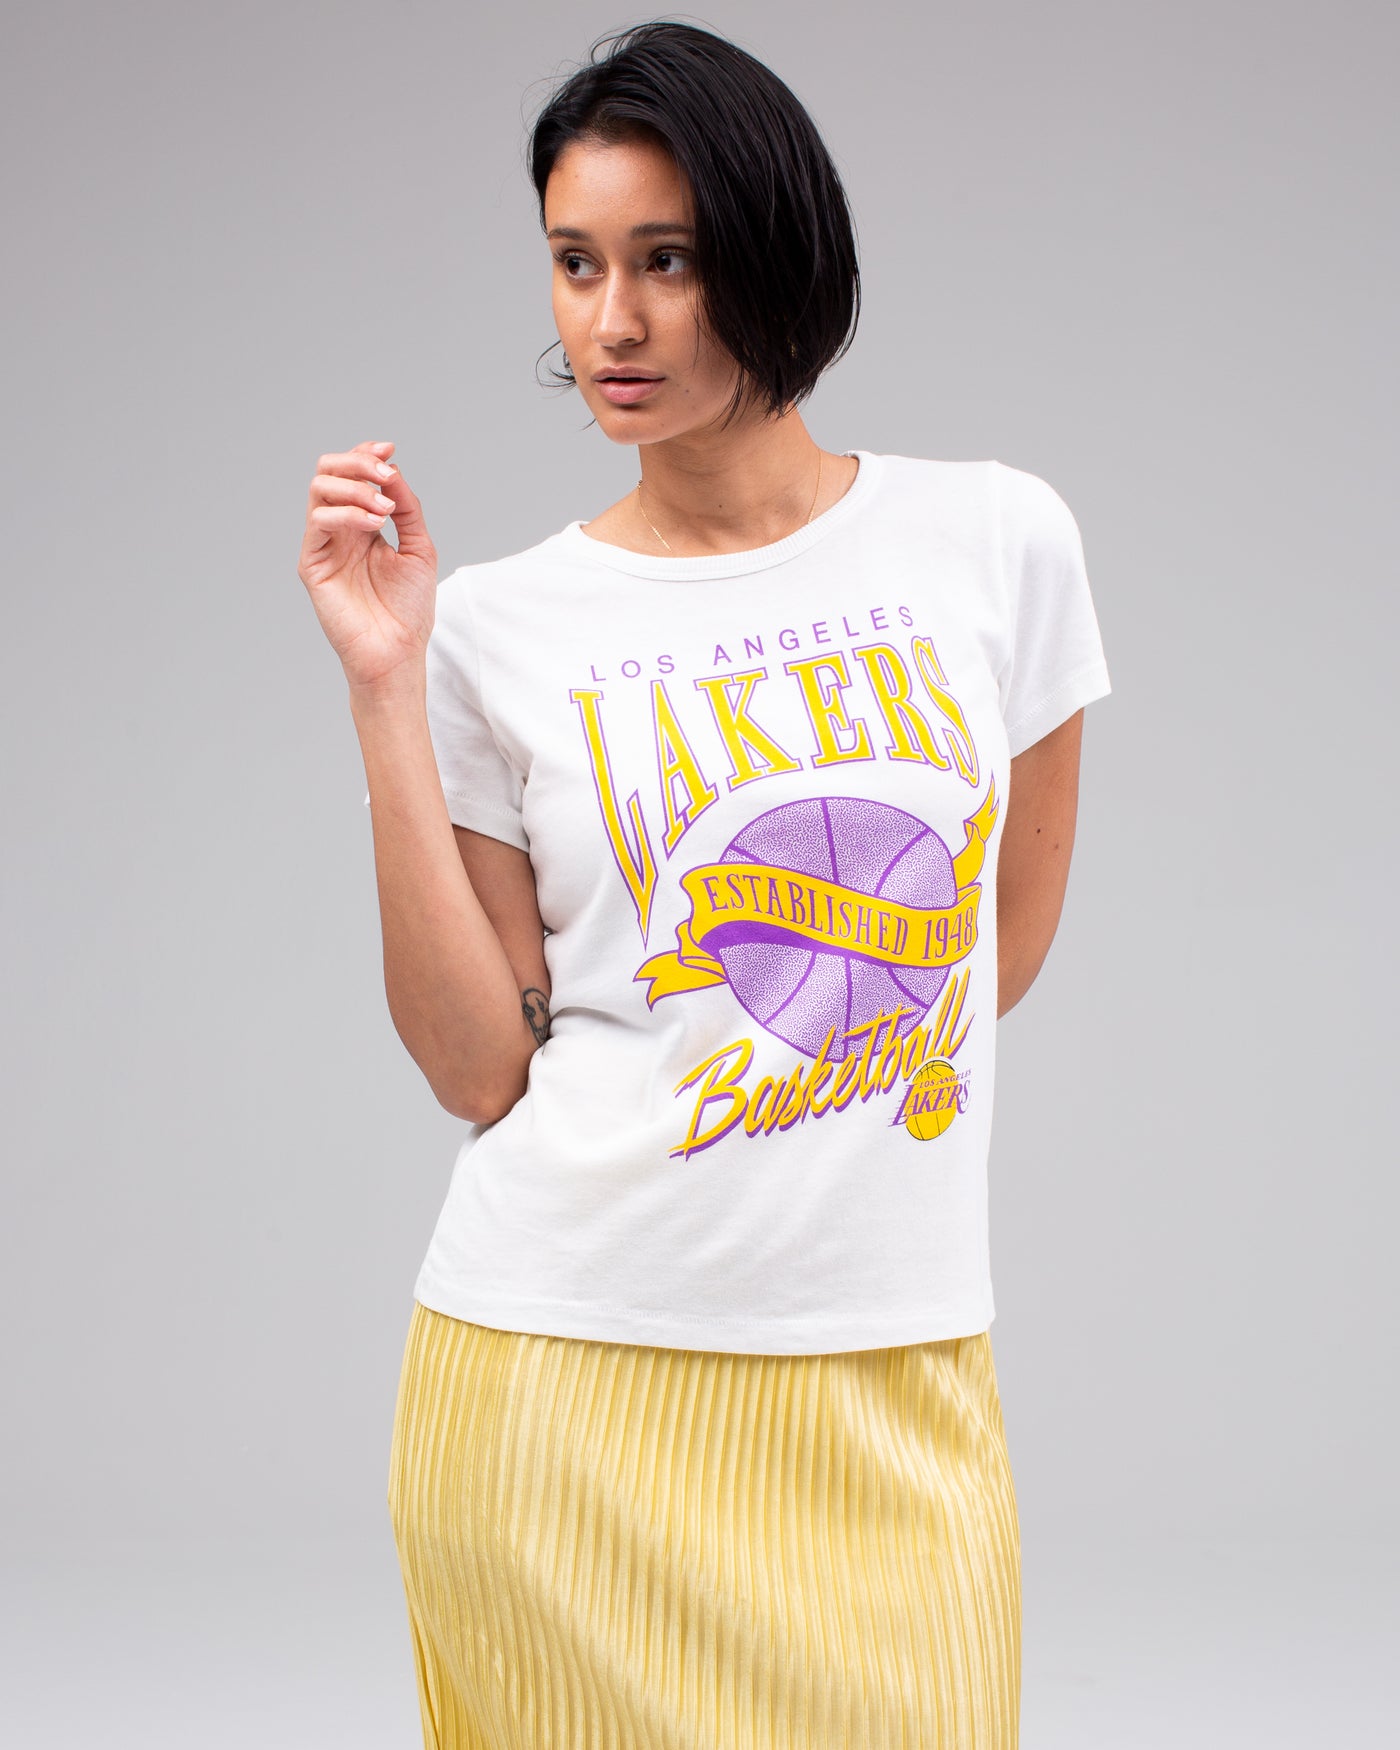 lakers women's clothing